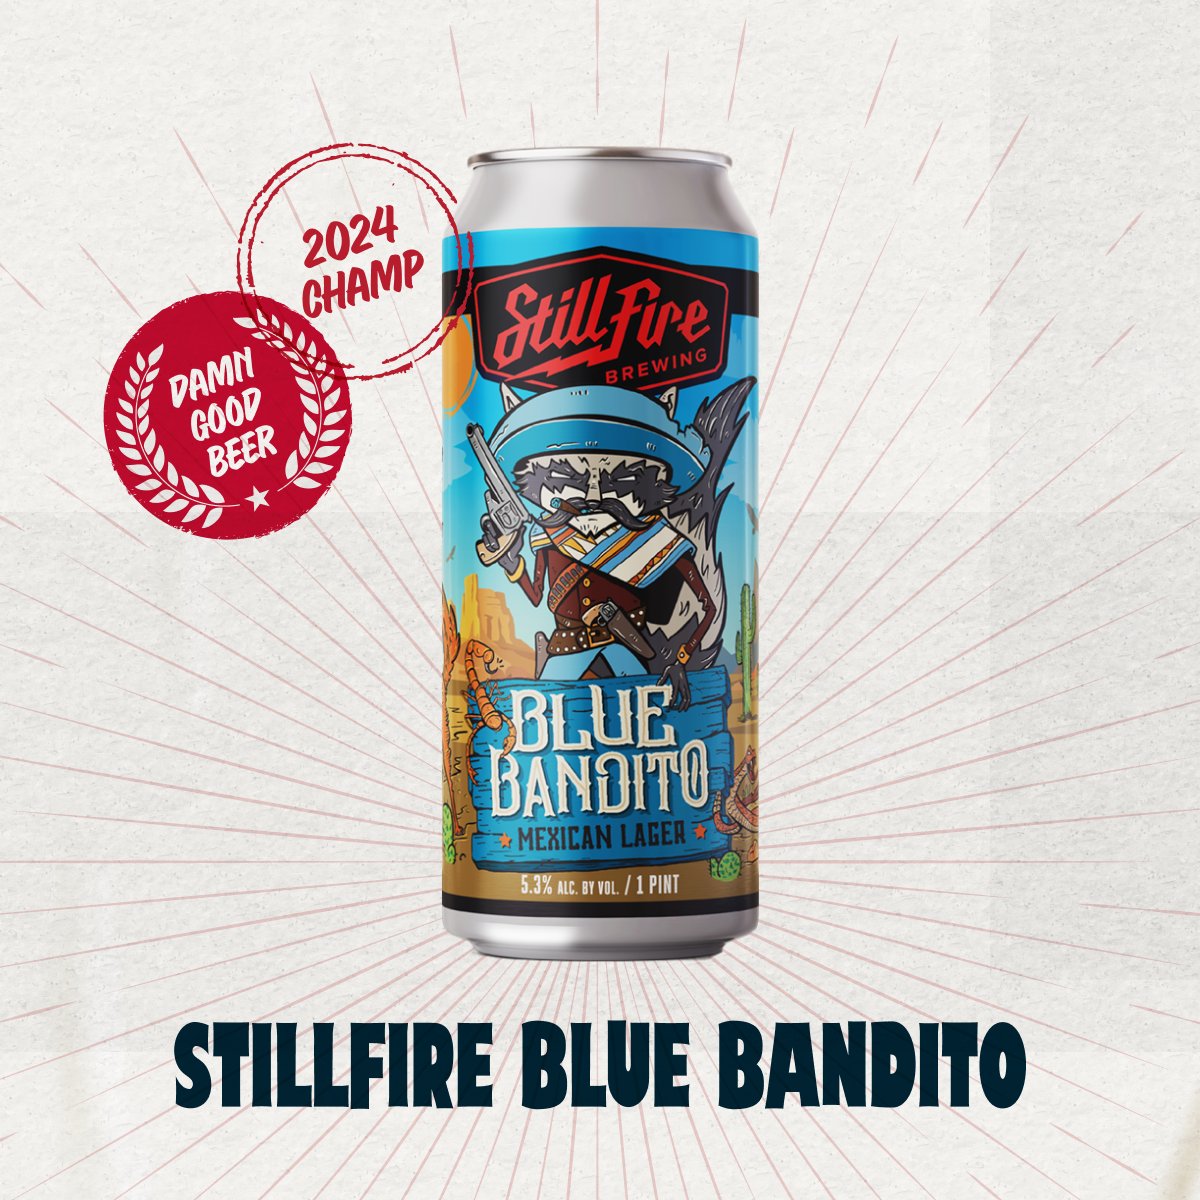 🏆🍻 Raise your glasses to the winner of the Taco Mac Craft Beer Bracket Challenge, Blue Bandito Mexican Lager, and the brewers behind its success @StillFireBrew! 🍻🏆 After an epic battle, Blue Bandito has emerged victorious to become your 2024 champ! 🌟🎉